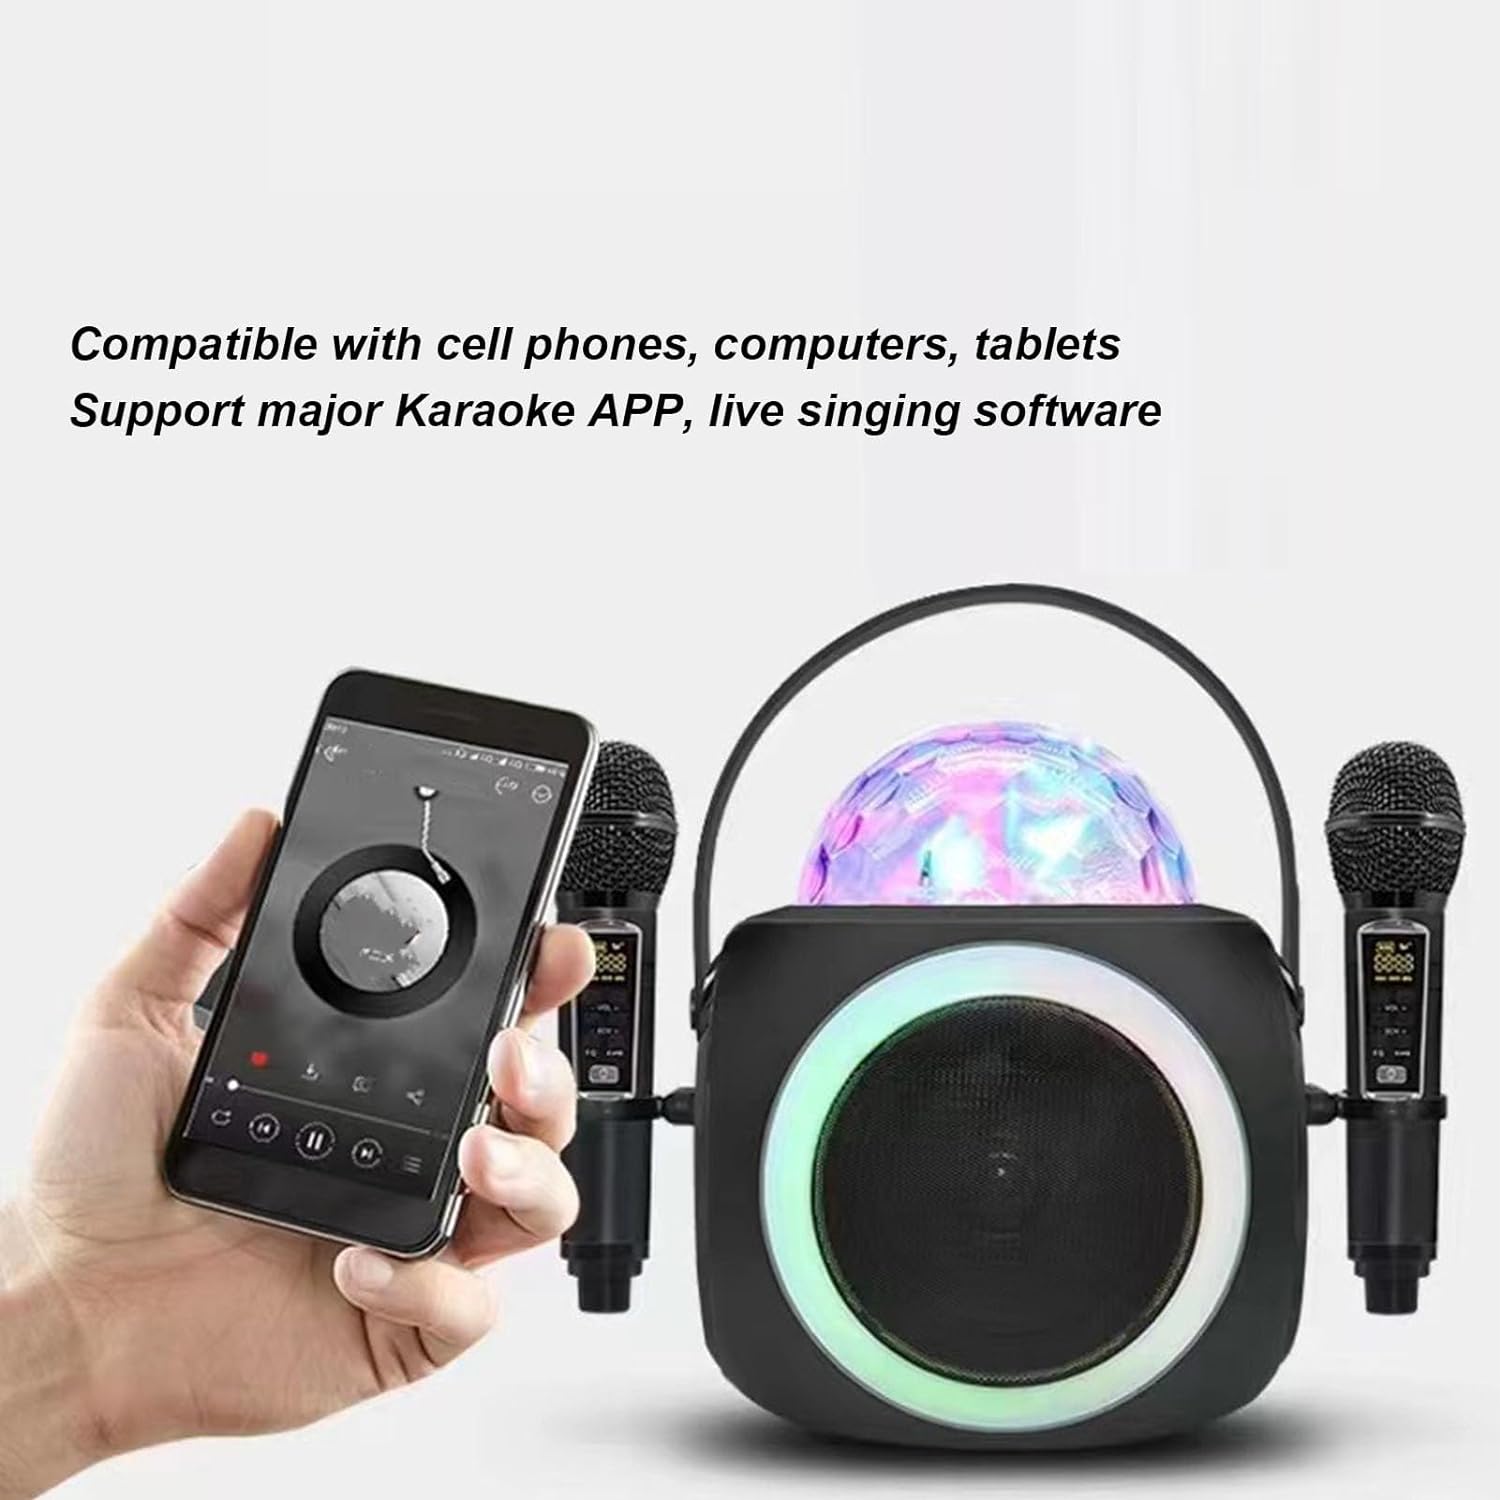 Sanpyl Bluetooth Karaoke Machine with 2 UHF Microphones, Portable Wireless Bluetooth Speaker Microphone Set with LED Light, Compatible with USB, Memory Card, AUX Input